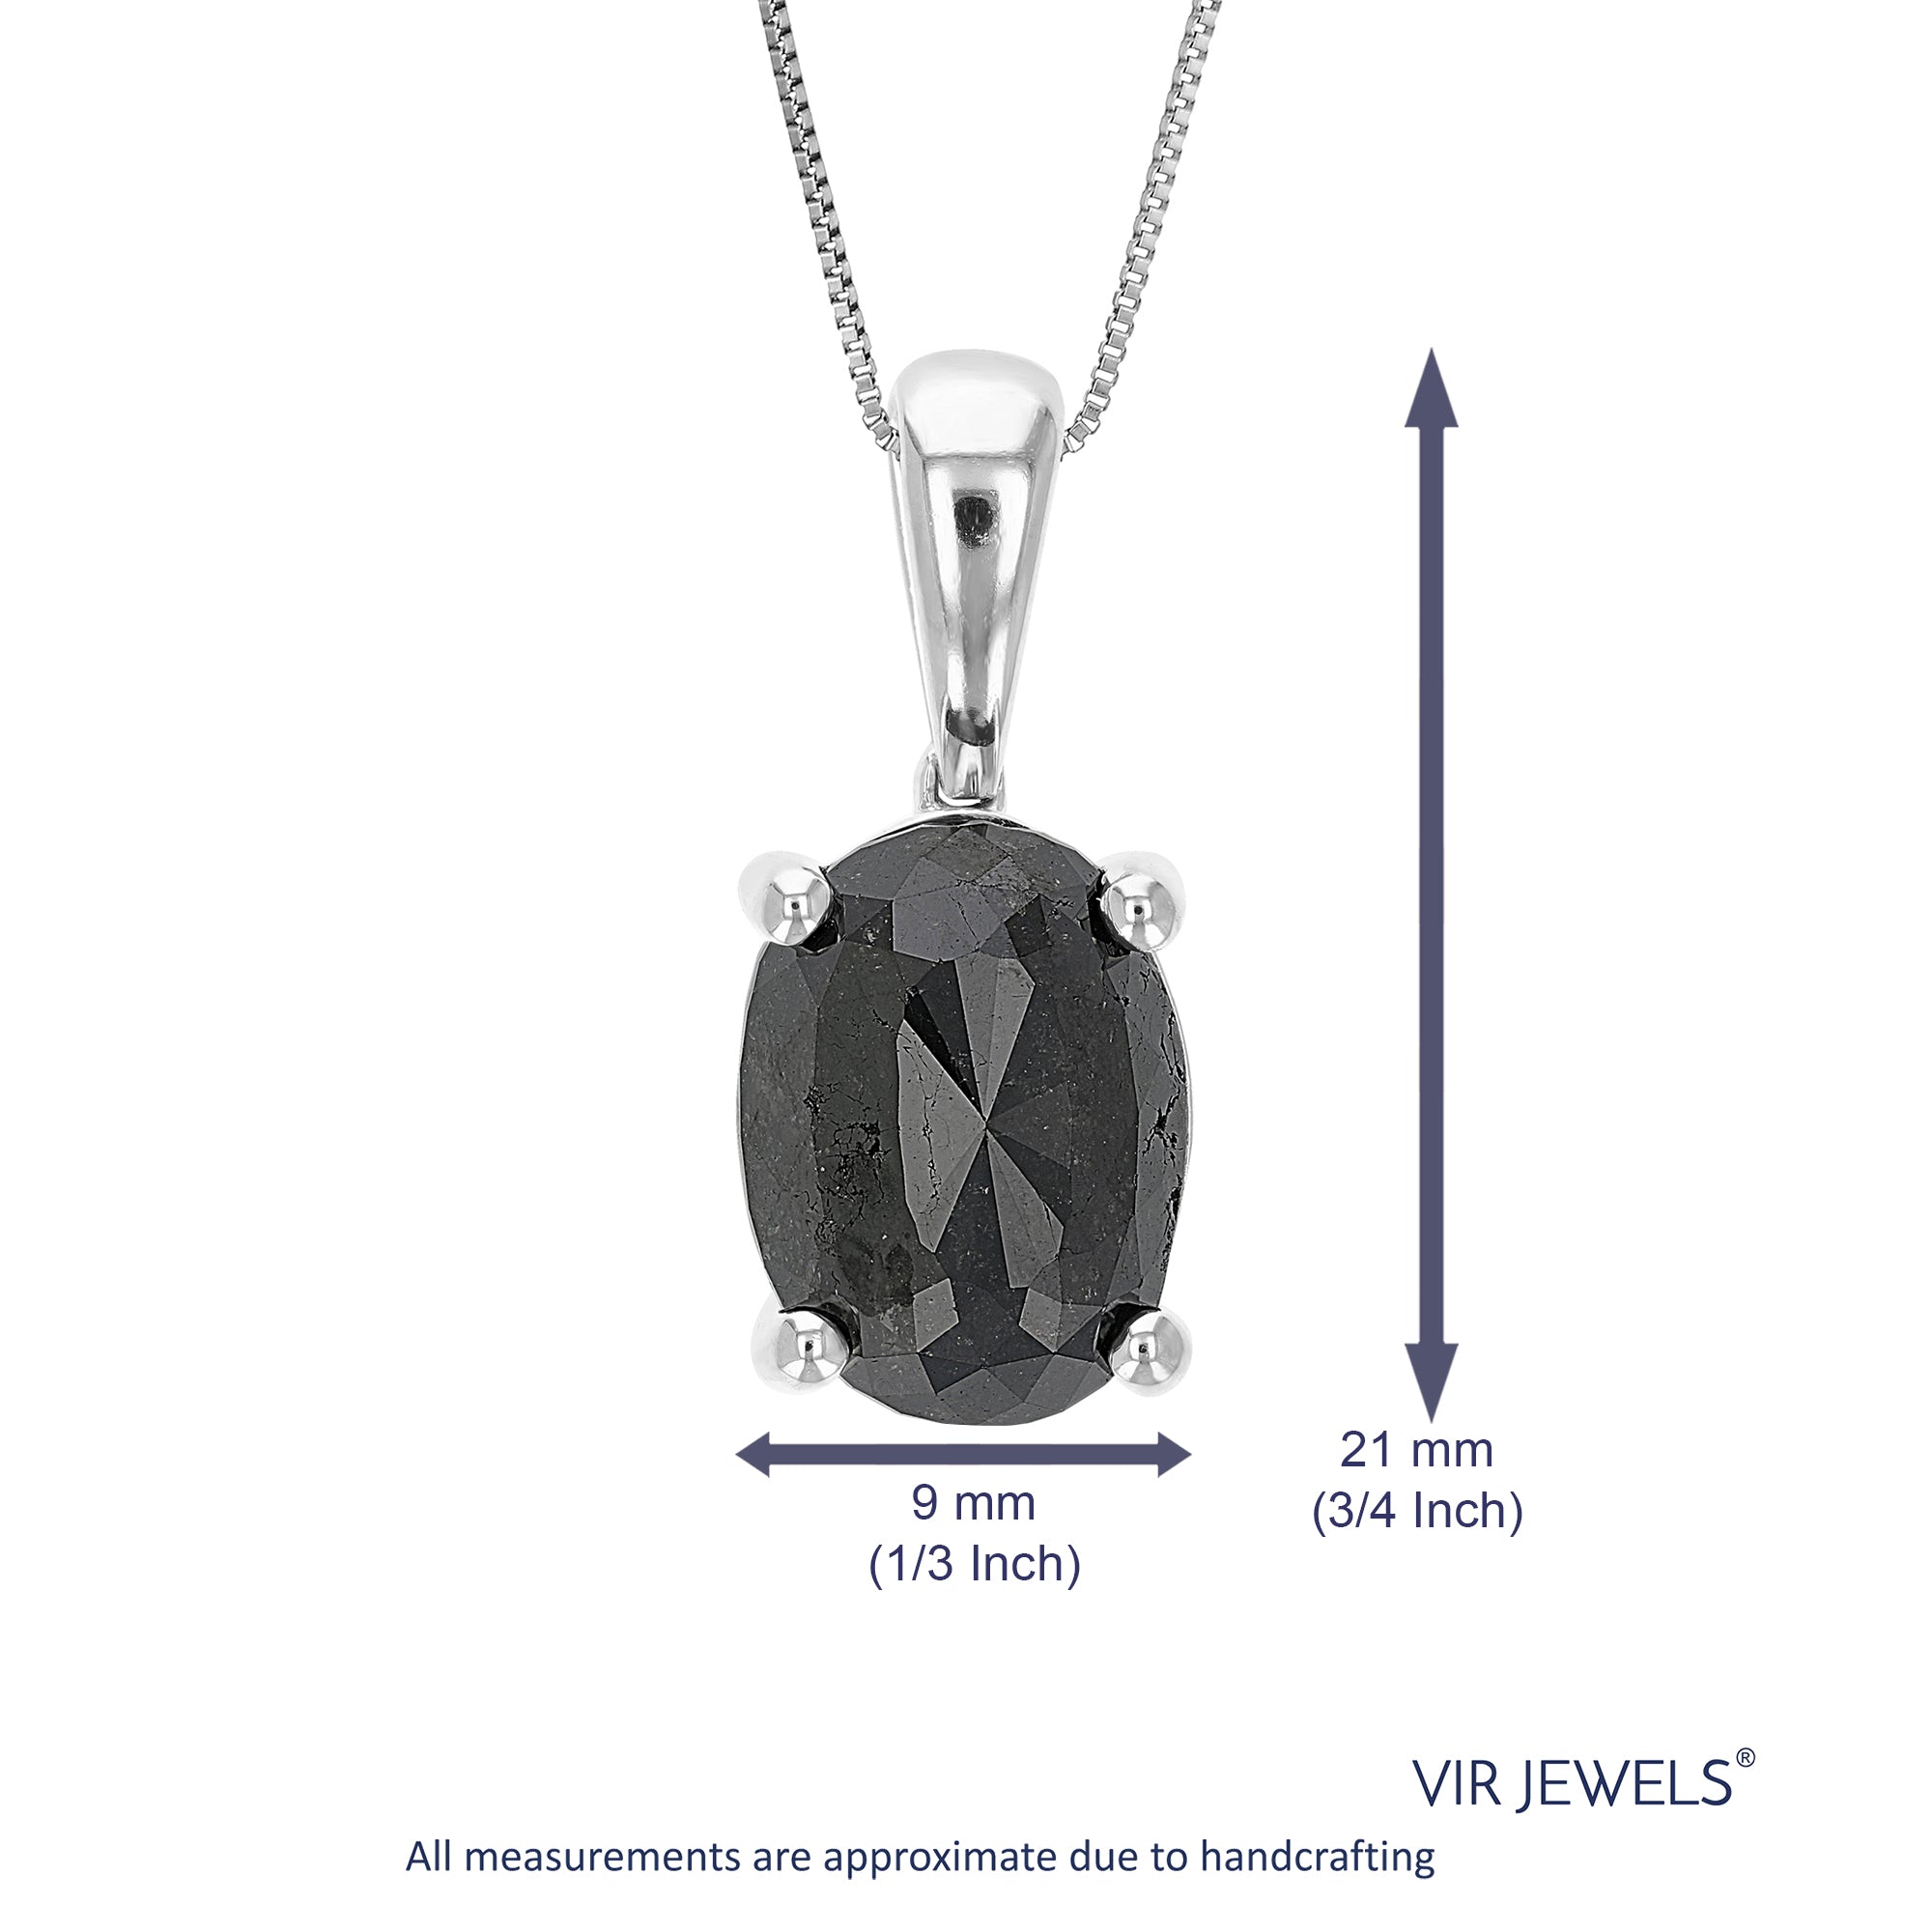 4 cttw Diamond Pendant, Black Diamond Oval Shape Pendant Necklace for Women in .925 Sterling Silver with 18 Inch Chain, Prong Setting